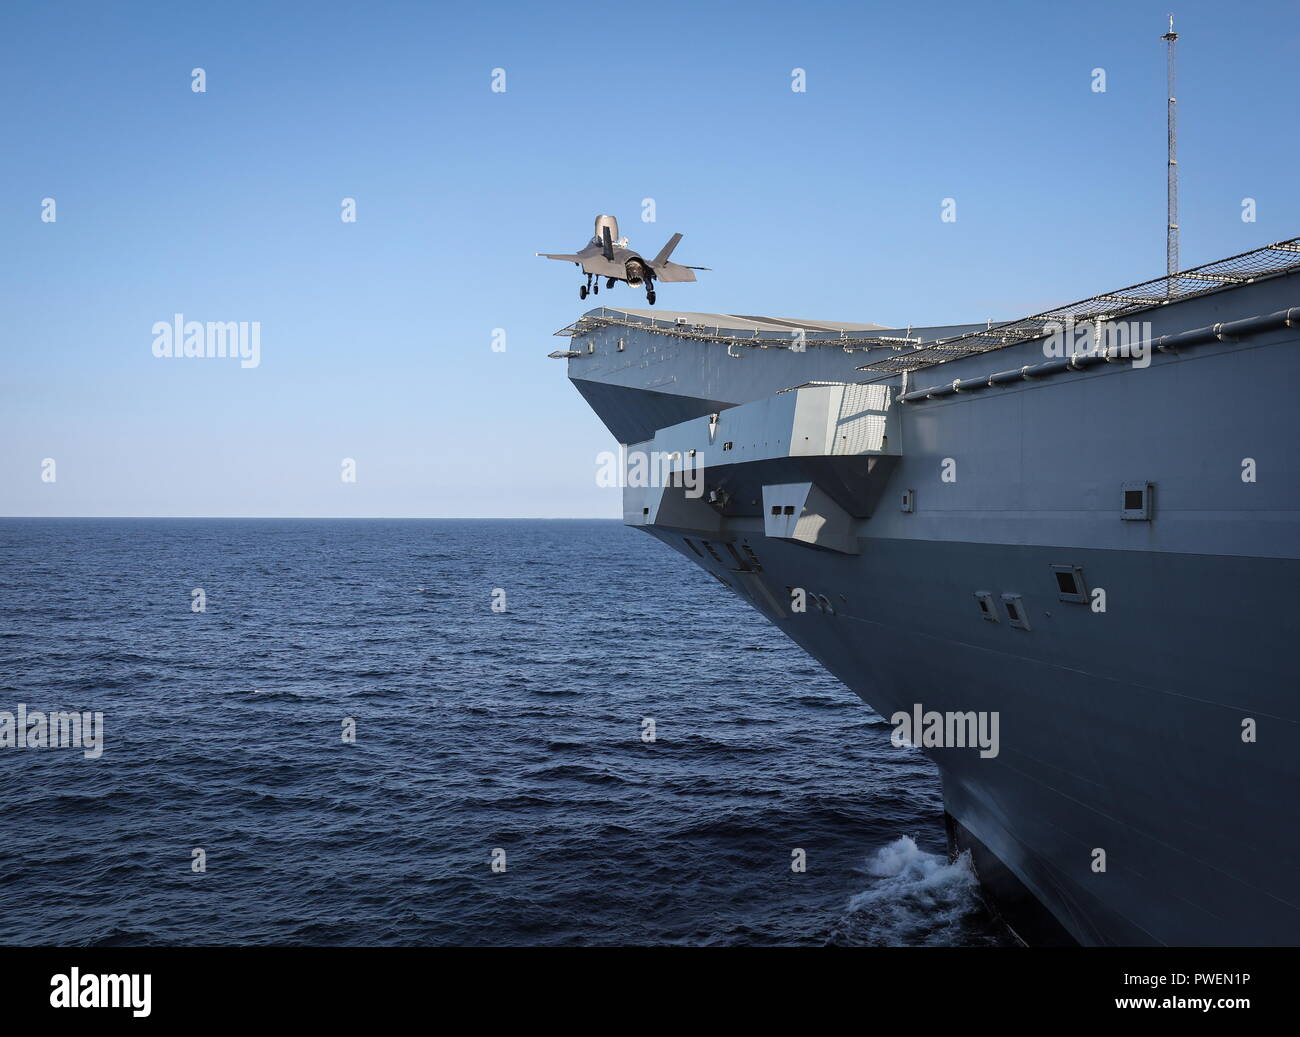 181006-N-N0101-241 NORTH ATLANTIC OCEAN (Oct. 6, 2018) An F-35B Lightning II assigned  to the F-35 Integrated Test Force at Naval Air Station Patuxent River, Md., launches from the Royal Navy aircraft carrier HMS Queen Elizabeth (R08). (U.S. Navy photo courtesy of the Royal Navy/Released) Stock Photo